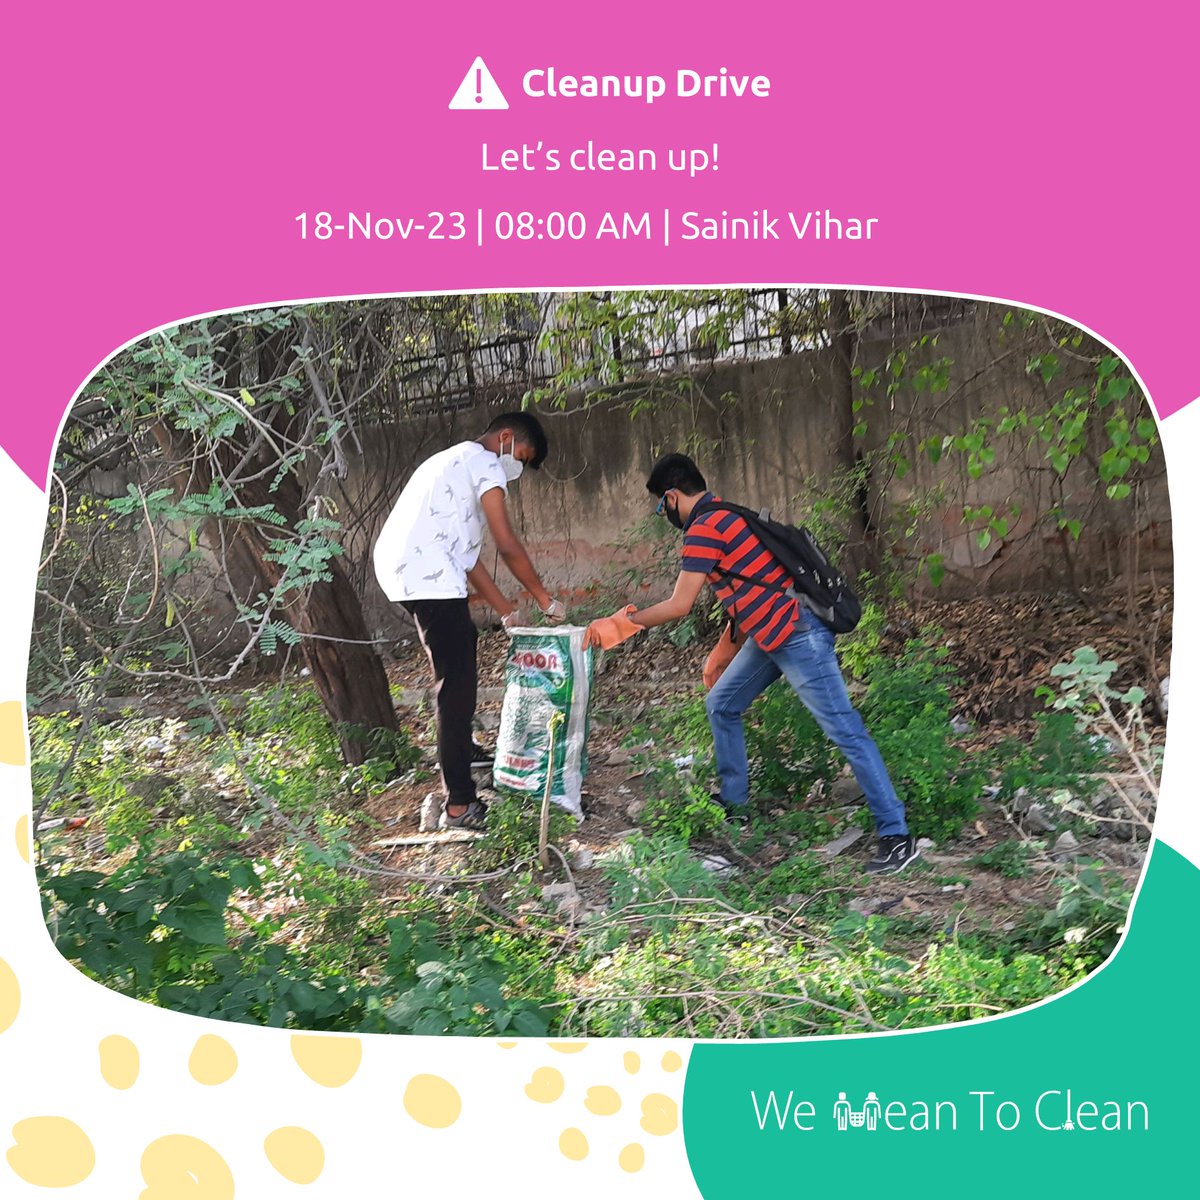 Join us for a #CleanupDrive 18-Nov-23 8 AM #SainikVihar Details: meetup.com/we-mean-to-cle…  #WeMeanToClean #CleanDelhi #SwachhBharat #MyCleanIndia #Cleanup #CleanupDrive #SwachhataHiSeva #StopLittering #Volunteer #Volunteering #Shramdaan #Delhi #DelhiNCR #India #TransformingIndia